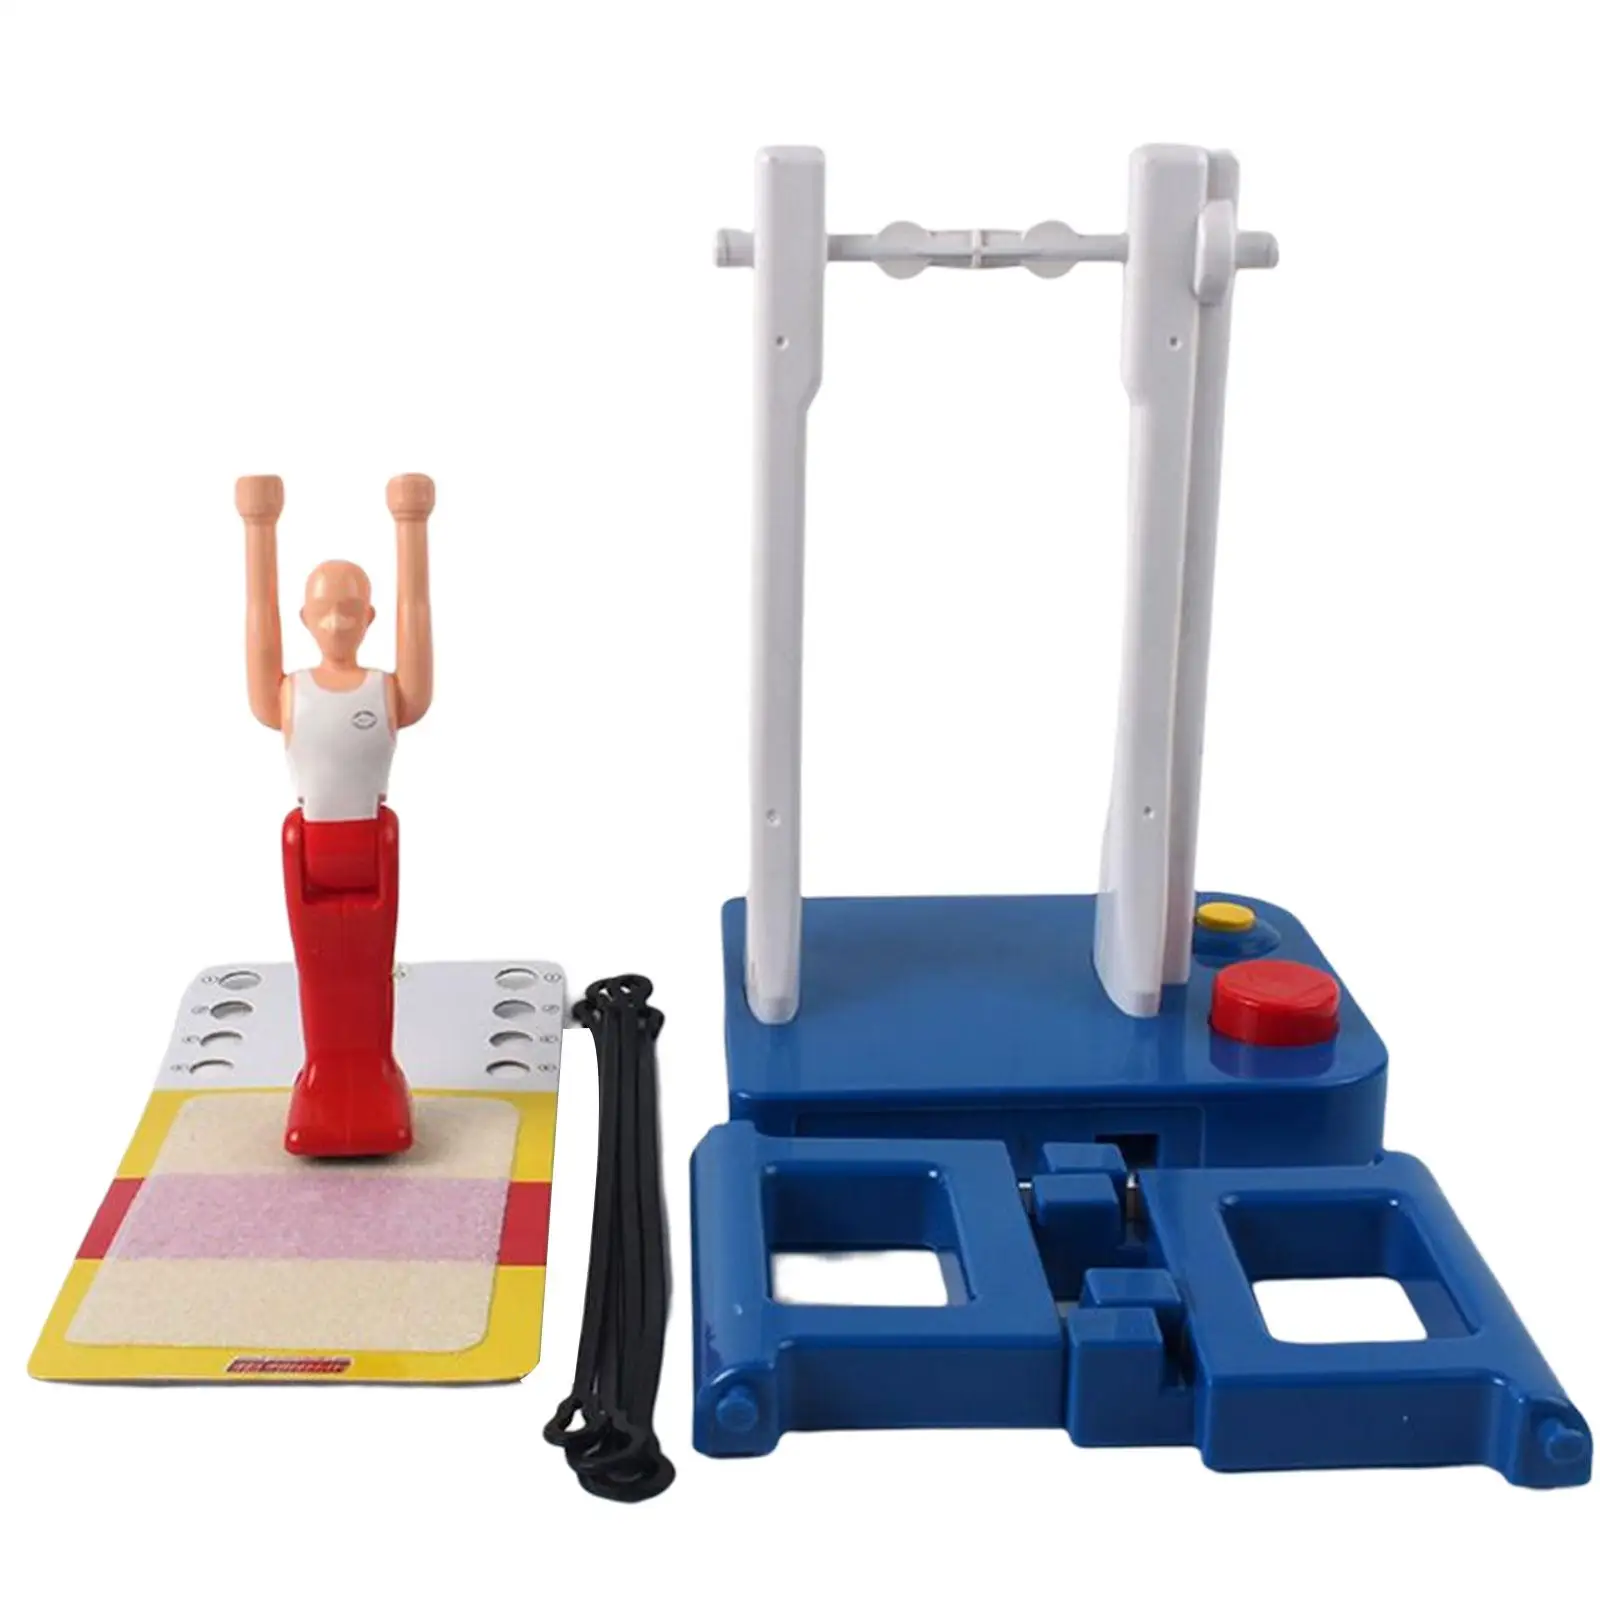 Simulation Horizontal Bar Development Toys Gifts Portable Gymnastic Machine for Preschool Learning Activities Camping Girls Boys